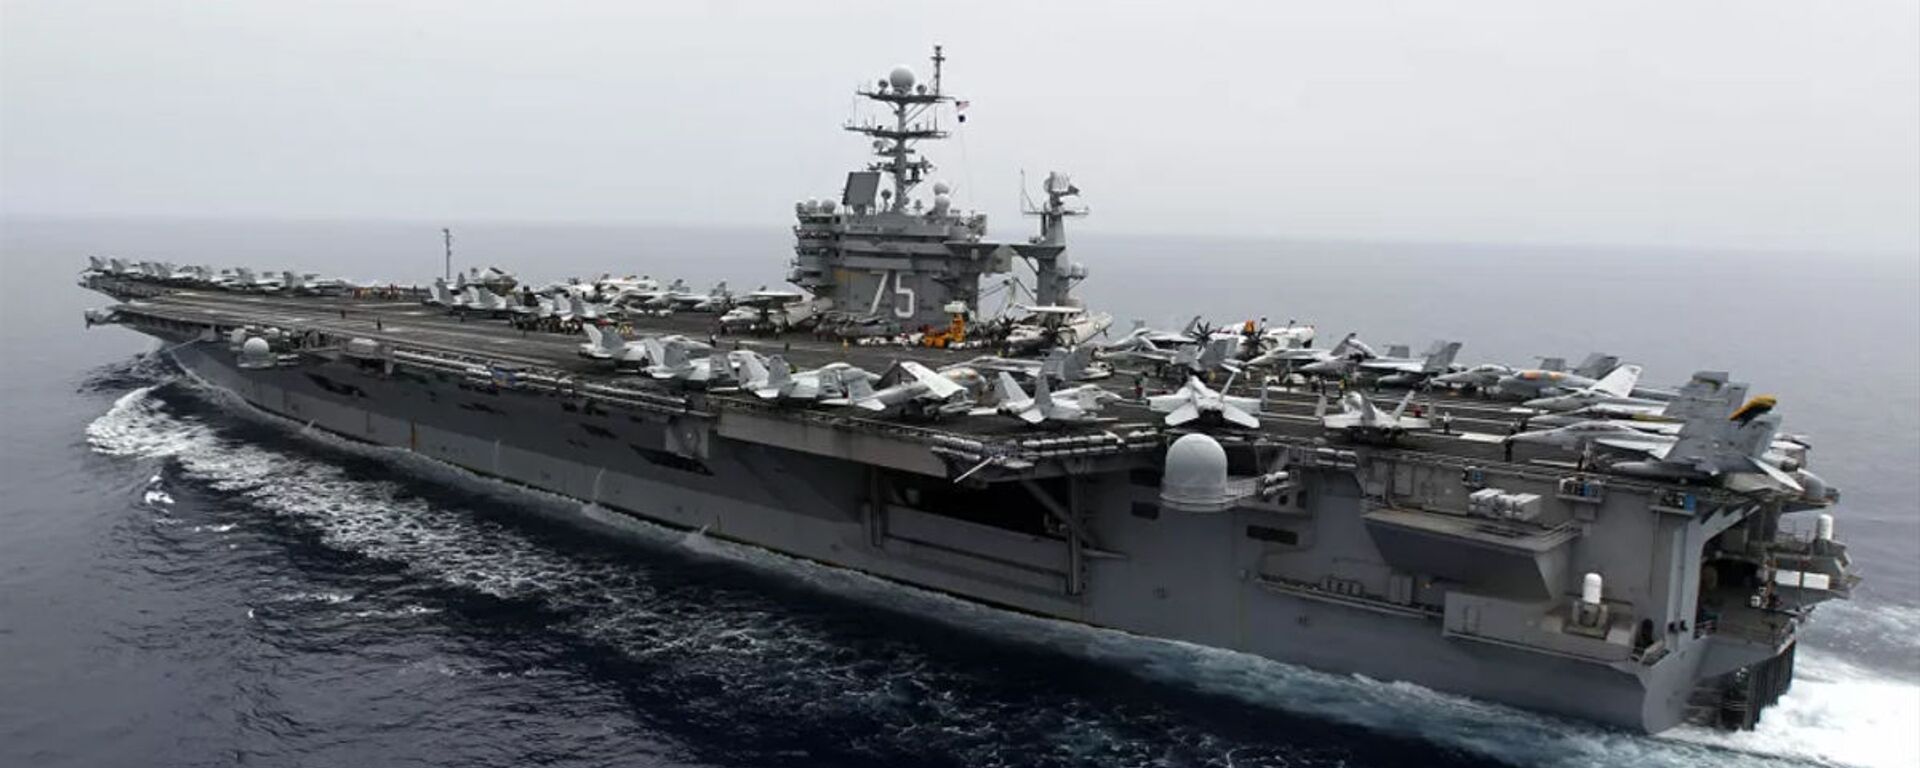 A general view shows the nuclear-powered aircraft carrier USS Harry S. Truman at an undisclosed position in the Mediterranean Sea, south of Sicily, Monday June 14, 2010 - 俄羅斯衛星通訊社, 1920, 20.01.2022